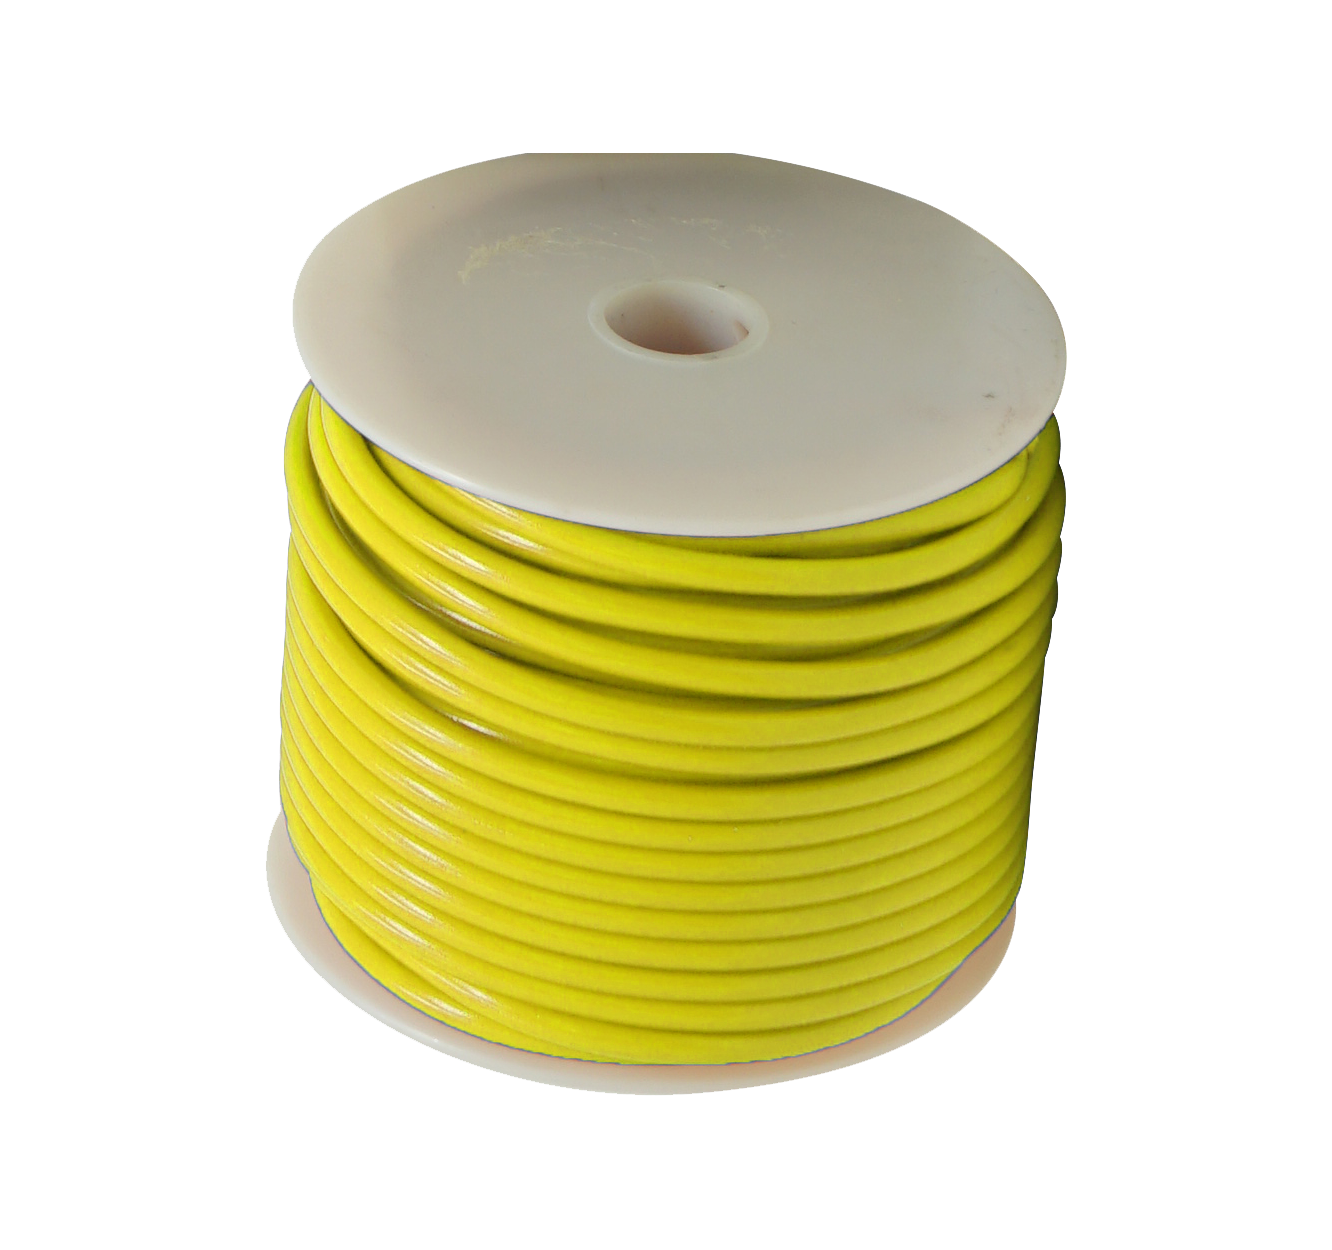 Electrical Primary Wire GPT 22 gauge